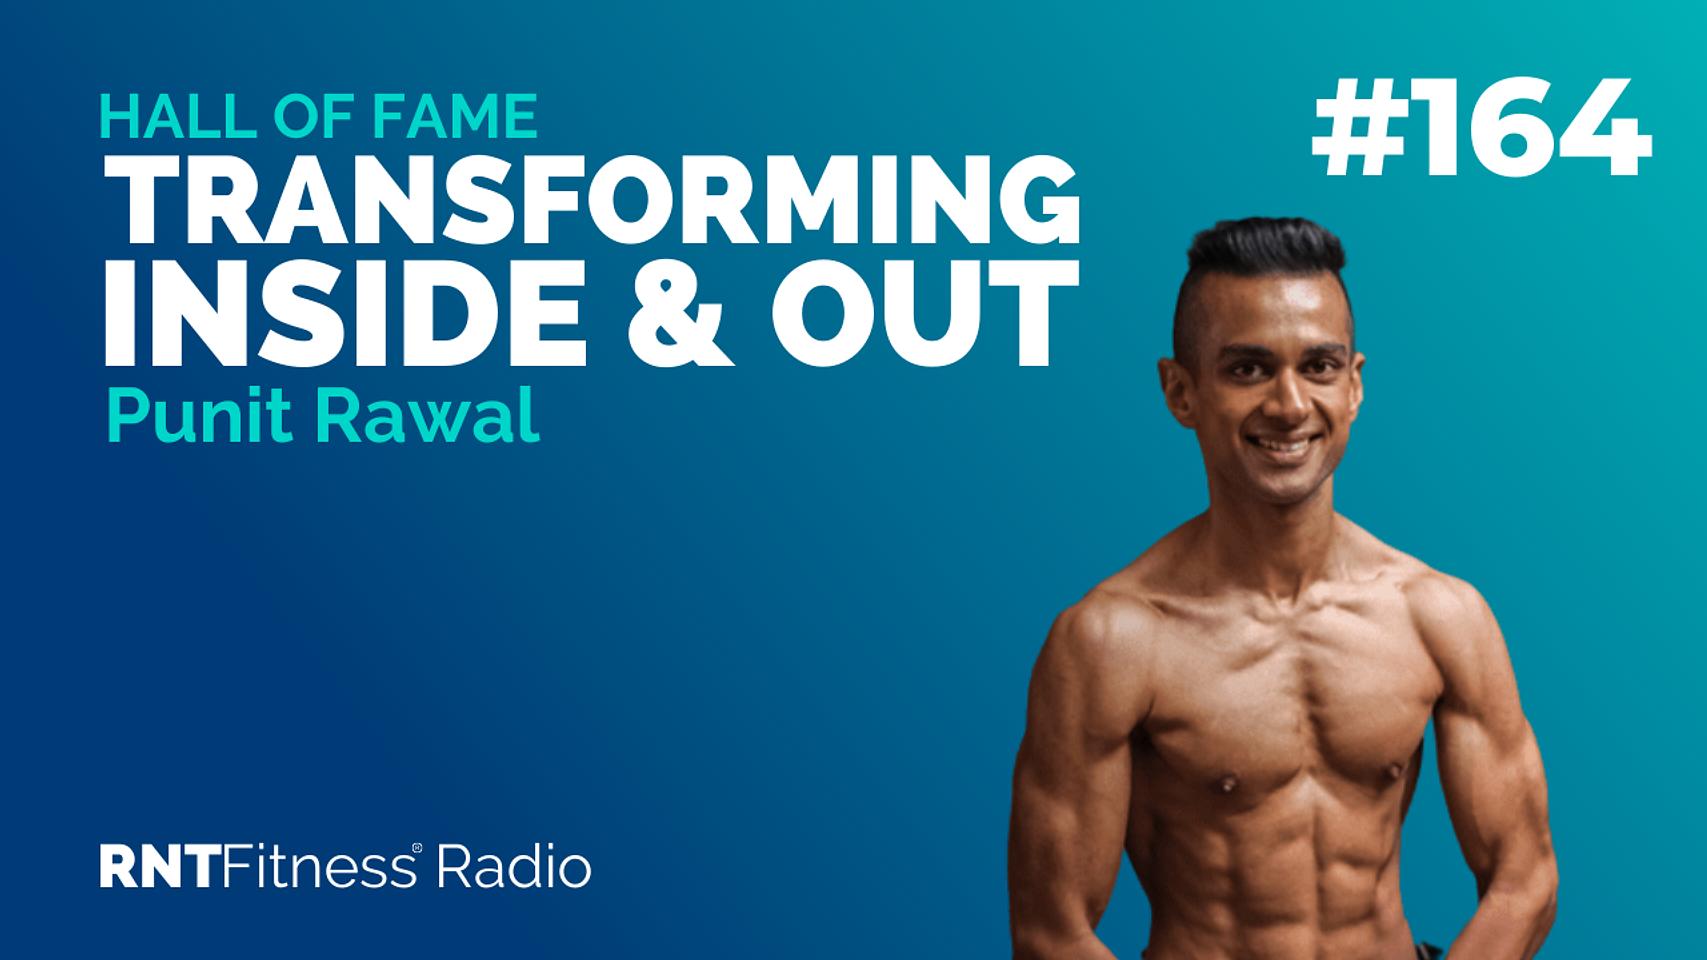 Ep. 164 - Hall of Fame | Punit Rawal - Overcoming Obstacles To Transform, Inside & Out